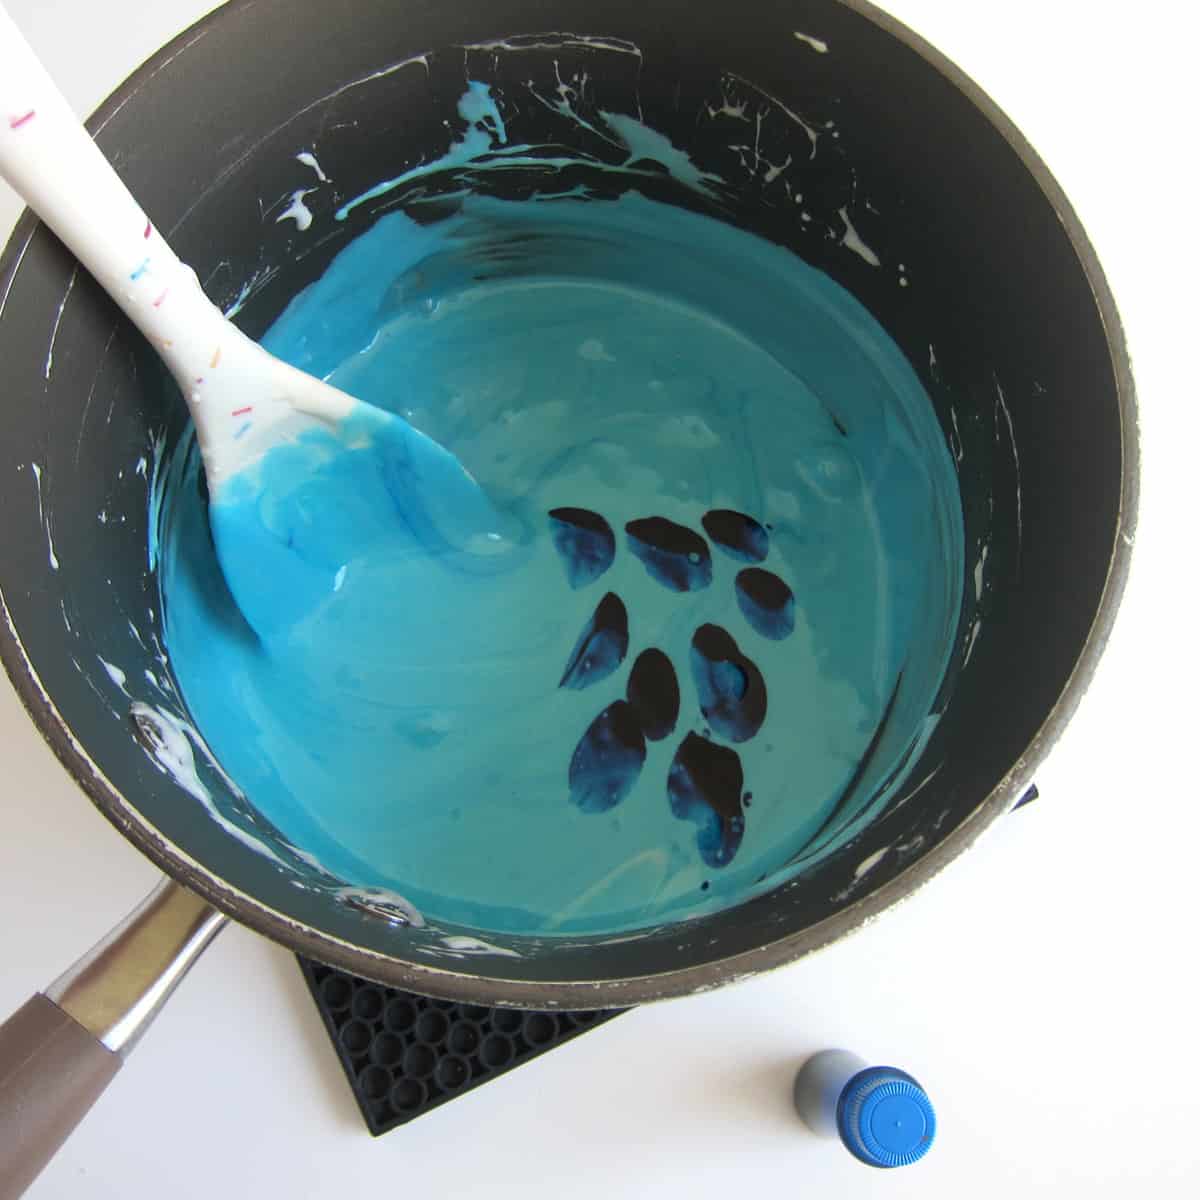 Make the blue marshmallows dark blue by adding more drops of blue food coloring.